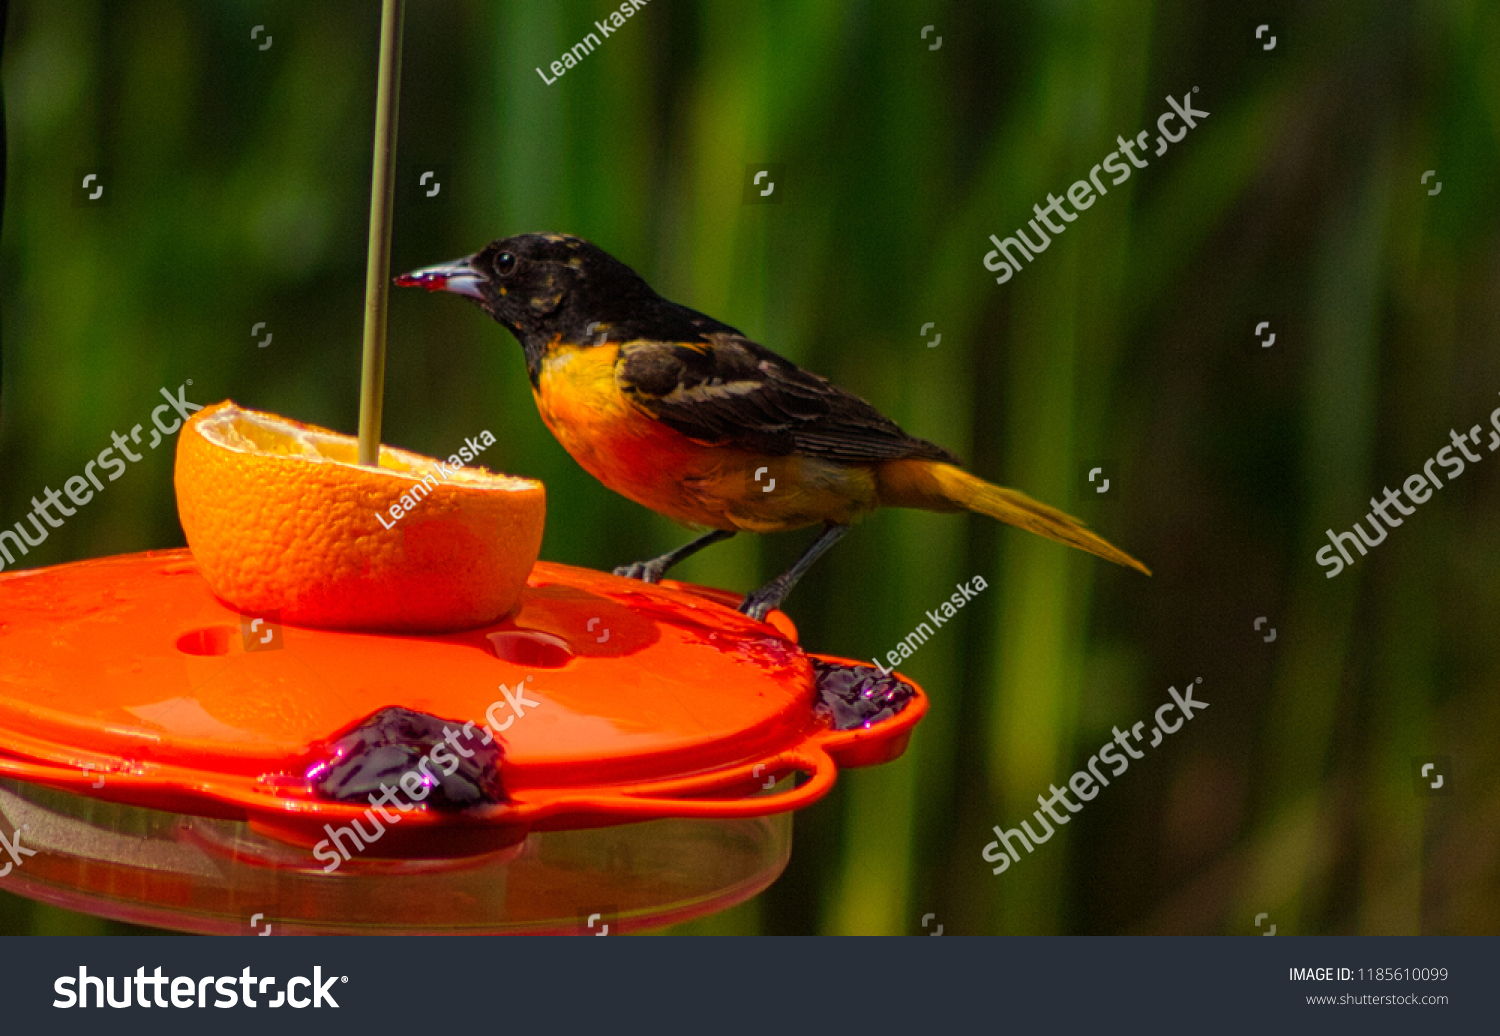 Beautiful oriole bird on a bird feeder eating a orange and grape jelly in the morning sunshine. #1185610099